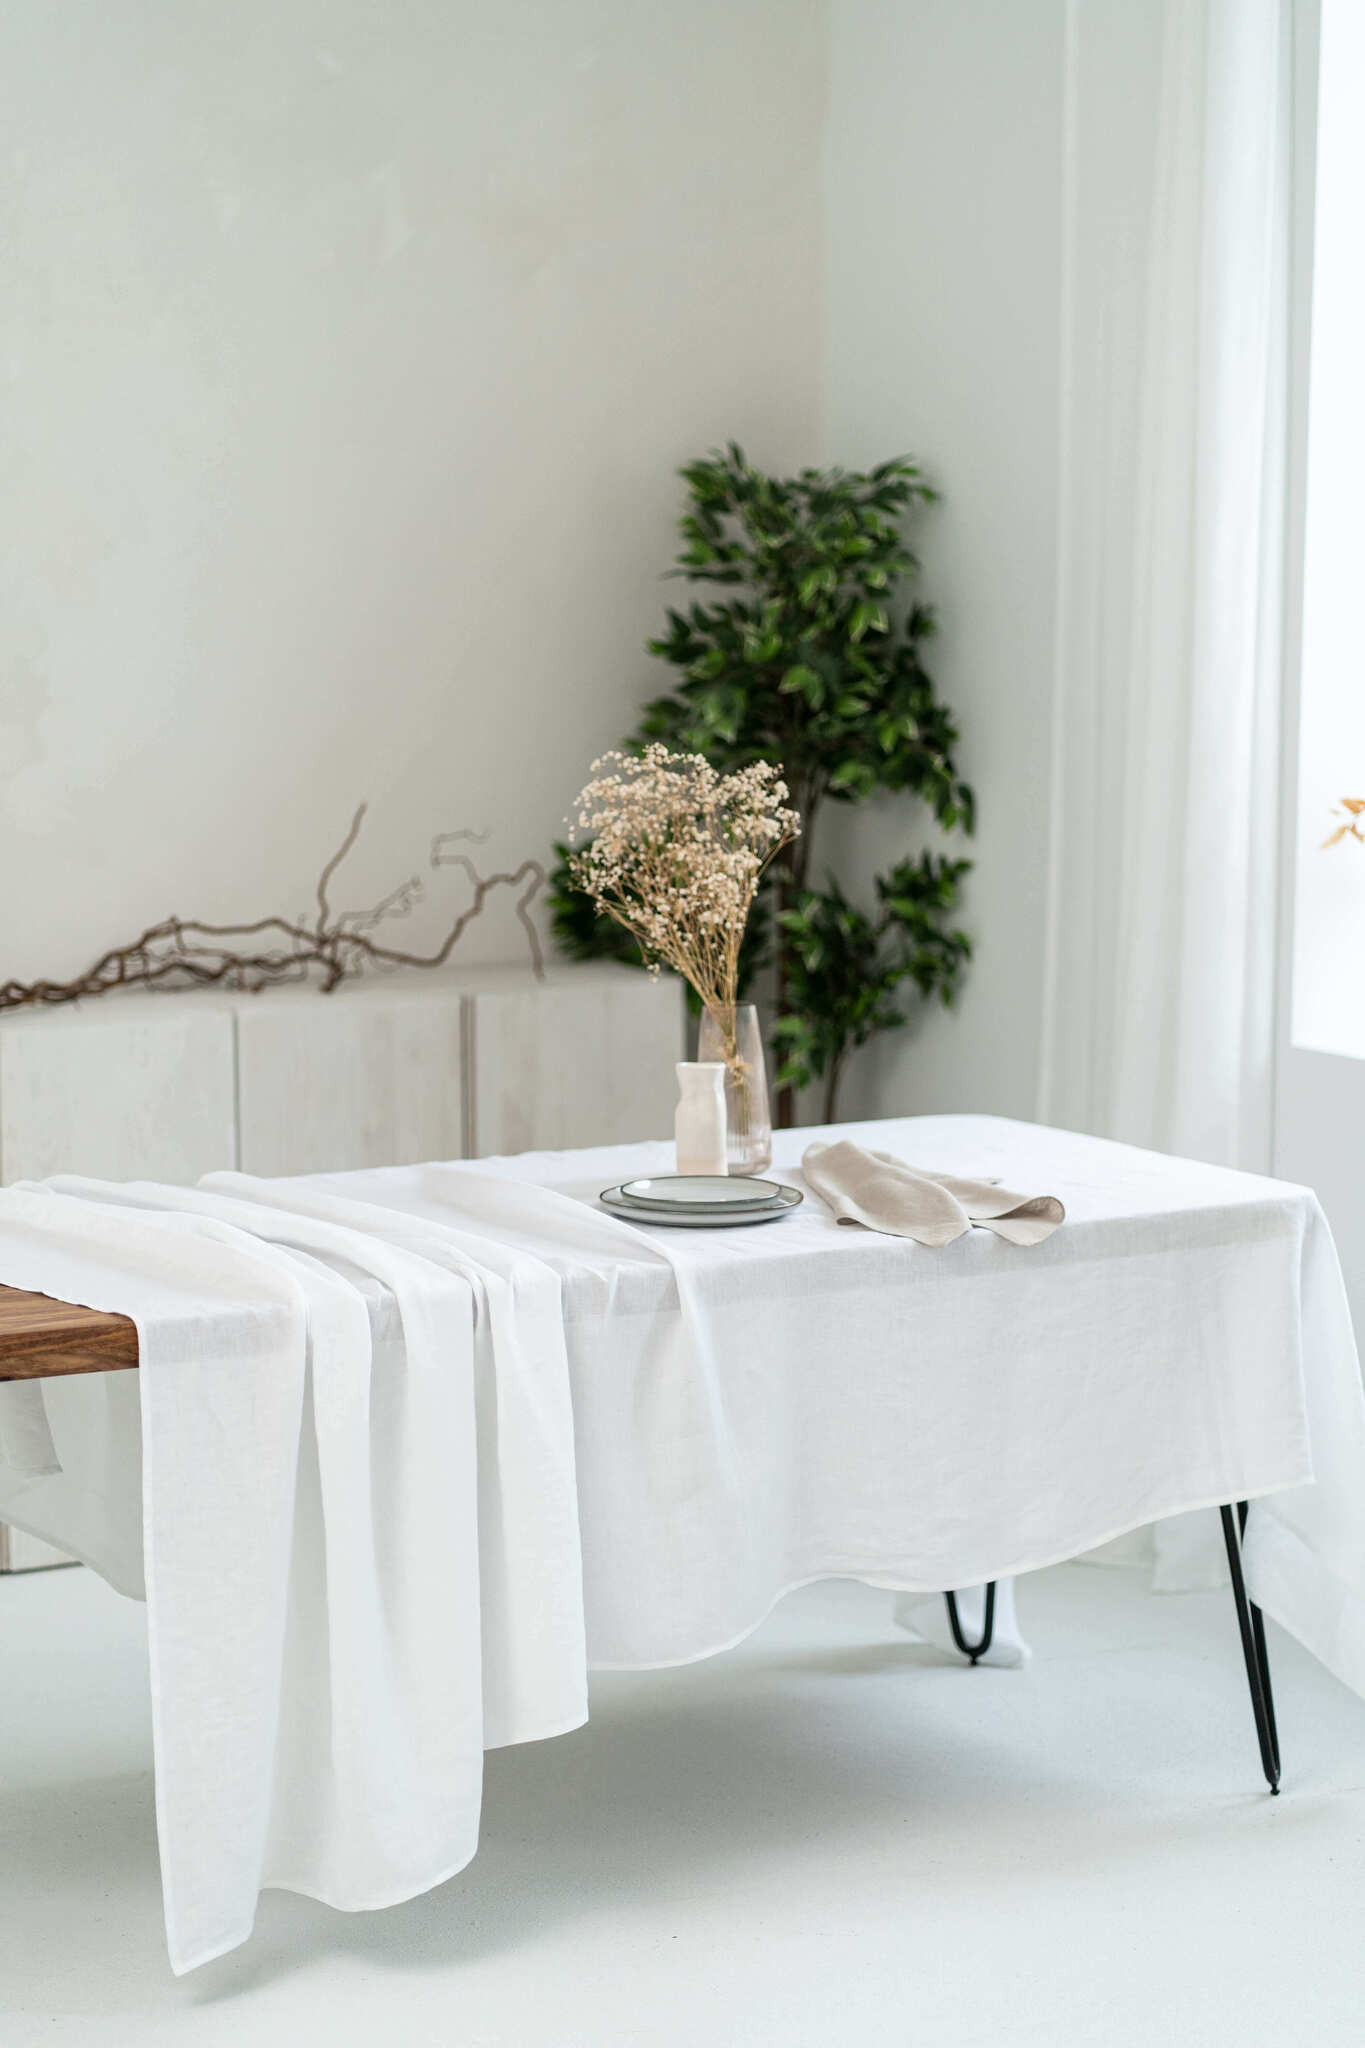 Linen tablecloth in white color